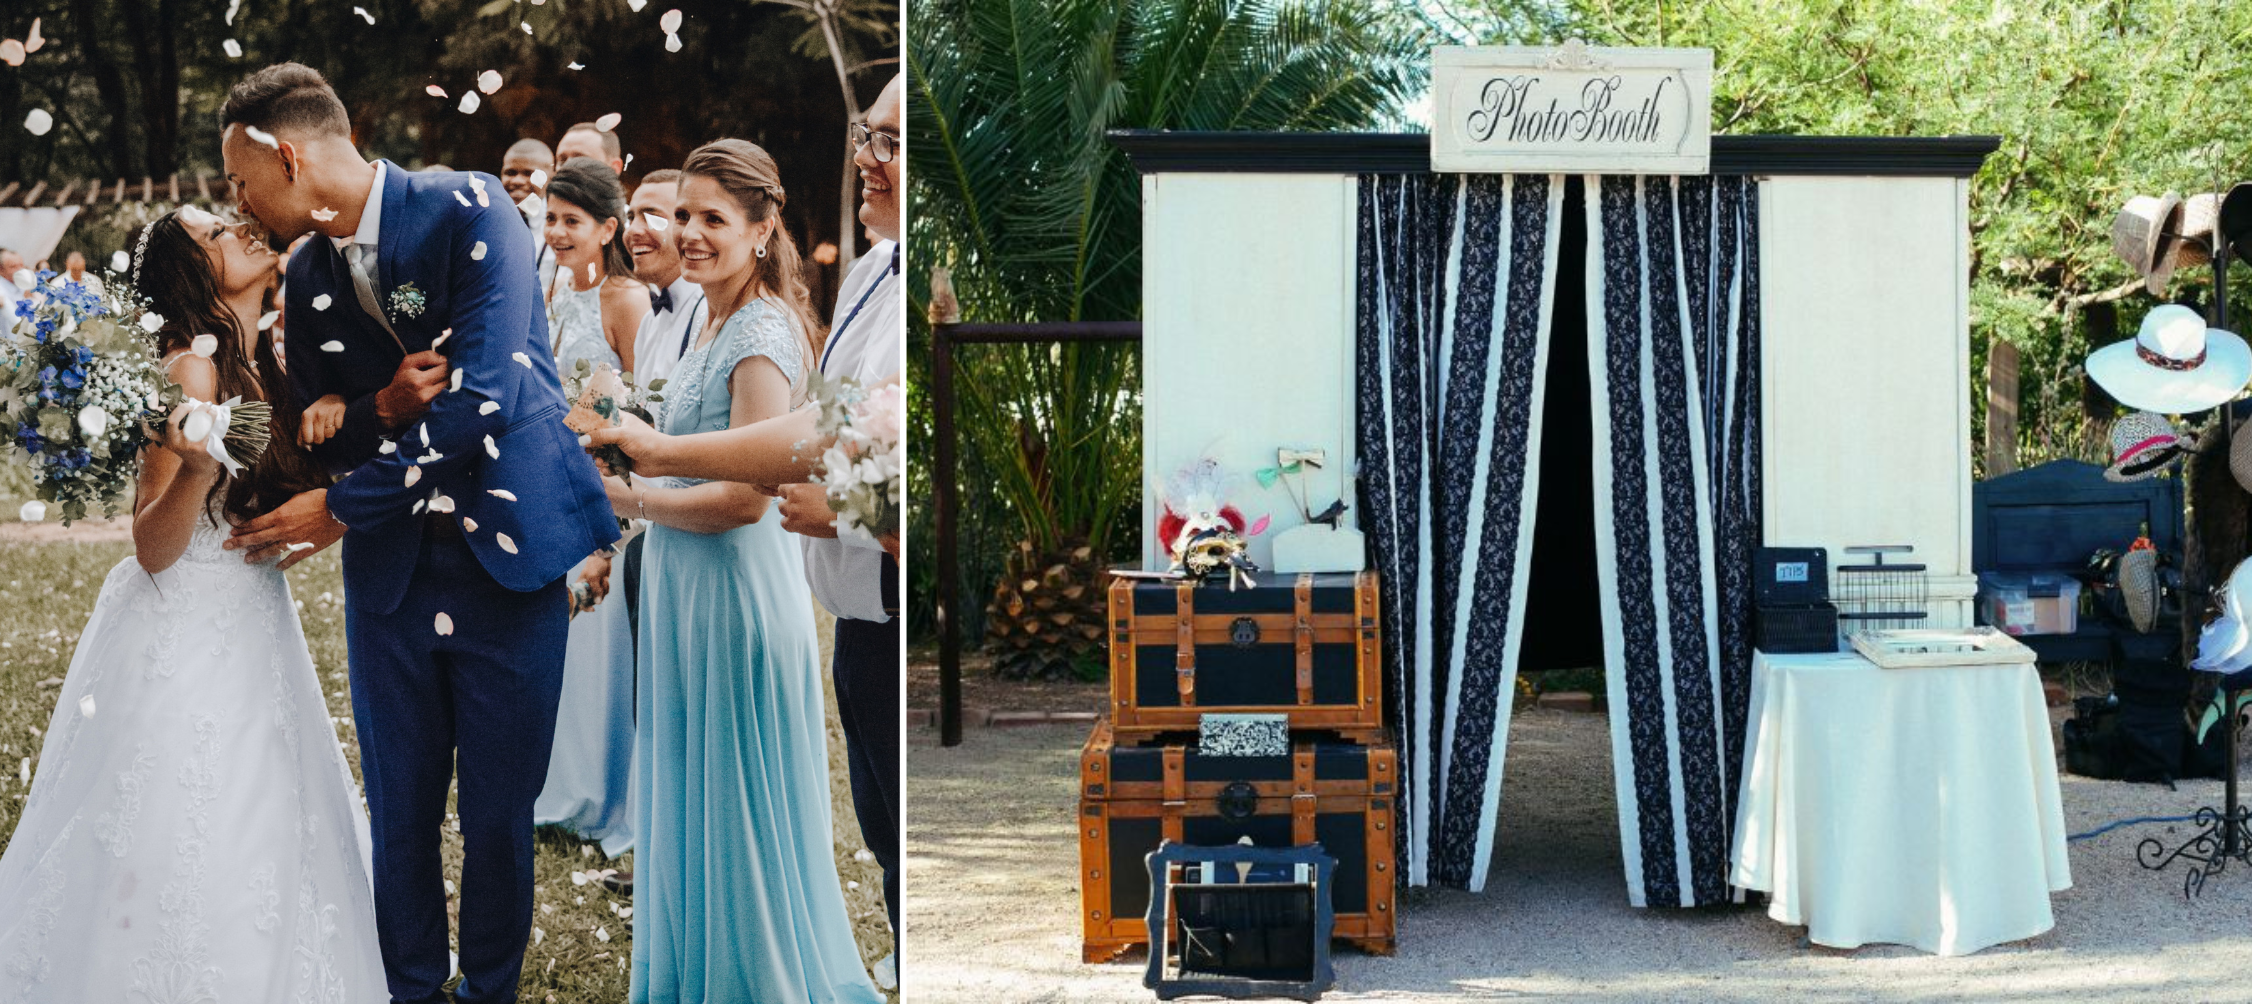 The Benefits of Booking a Photo Booth for Your Wedding